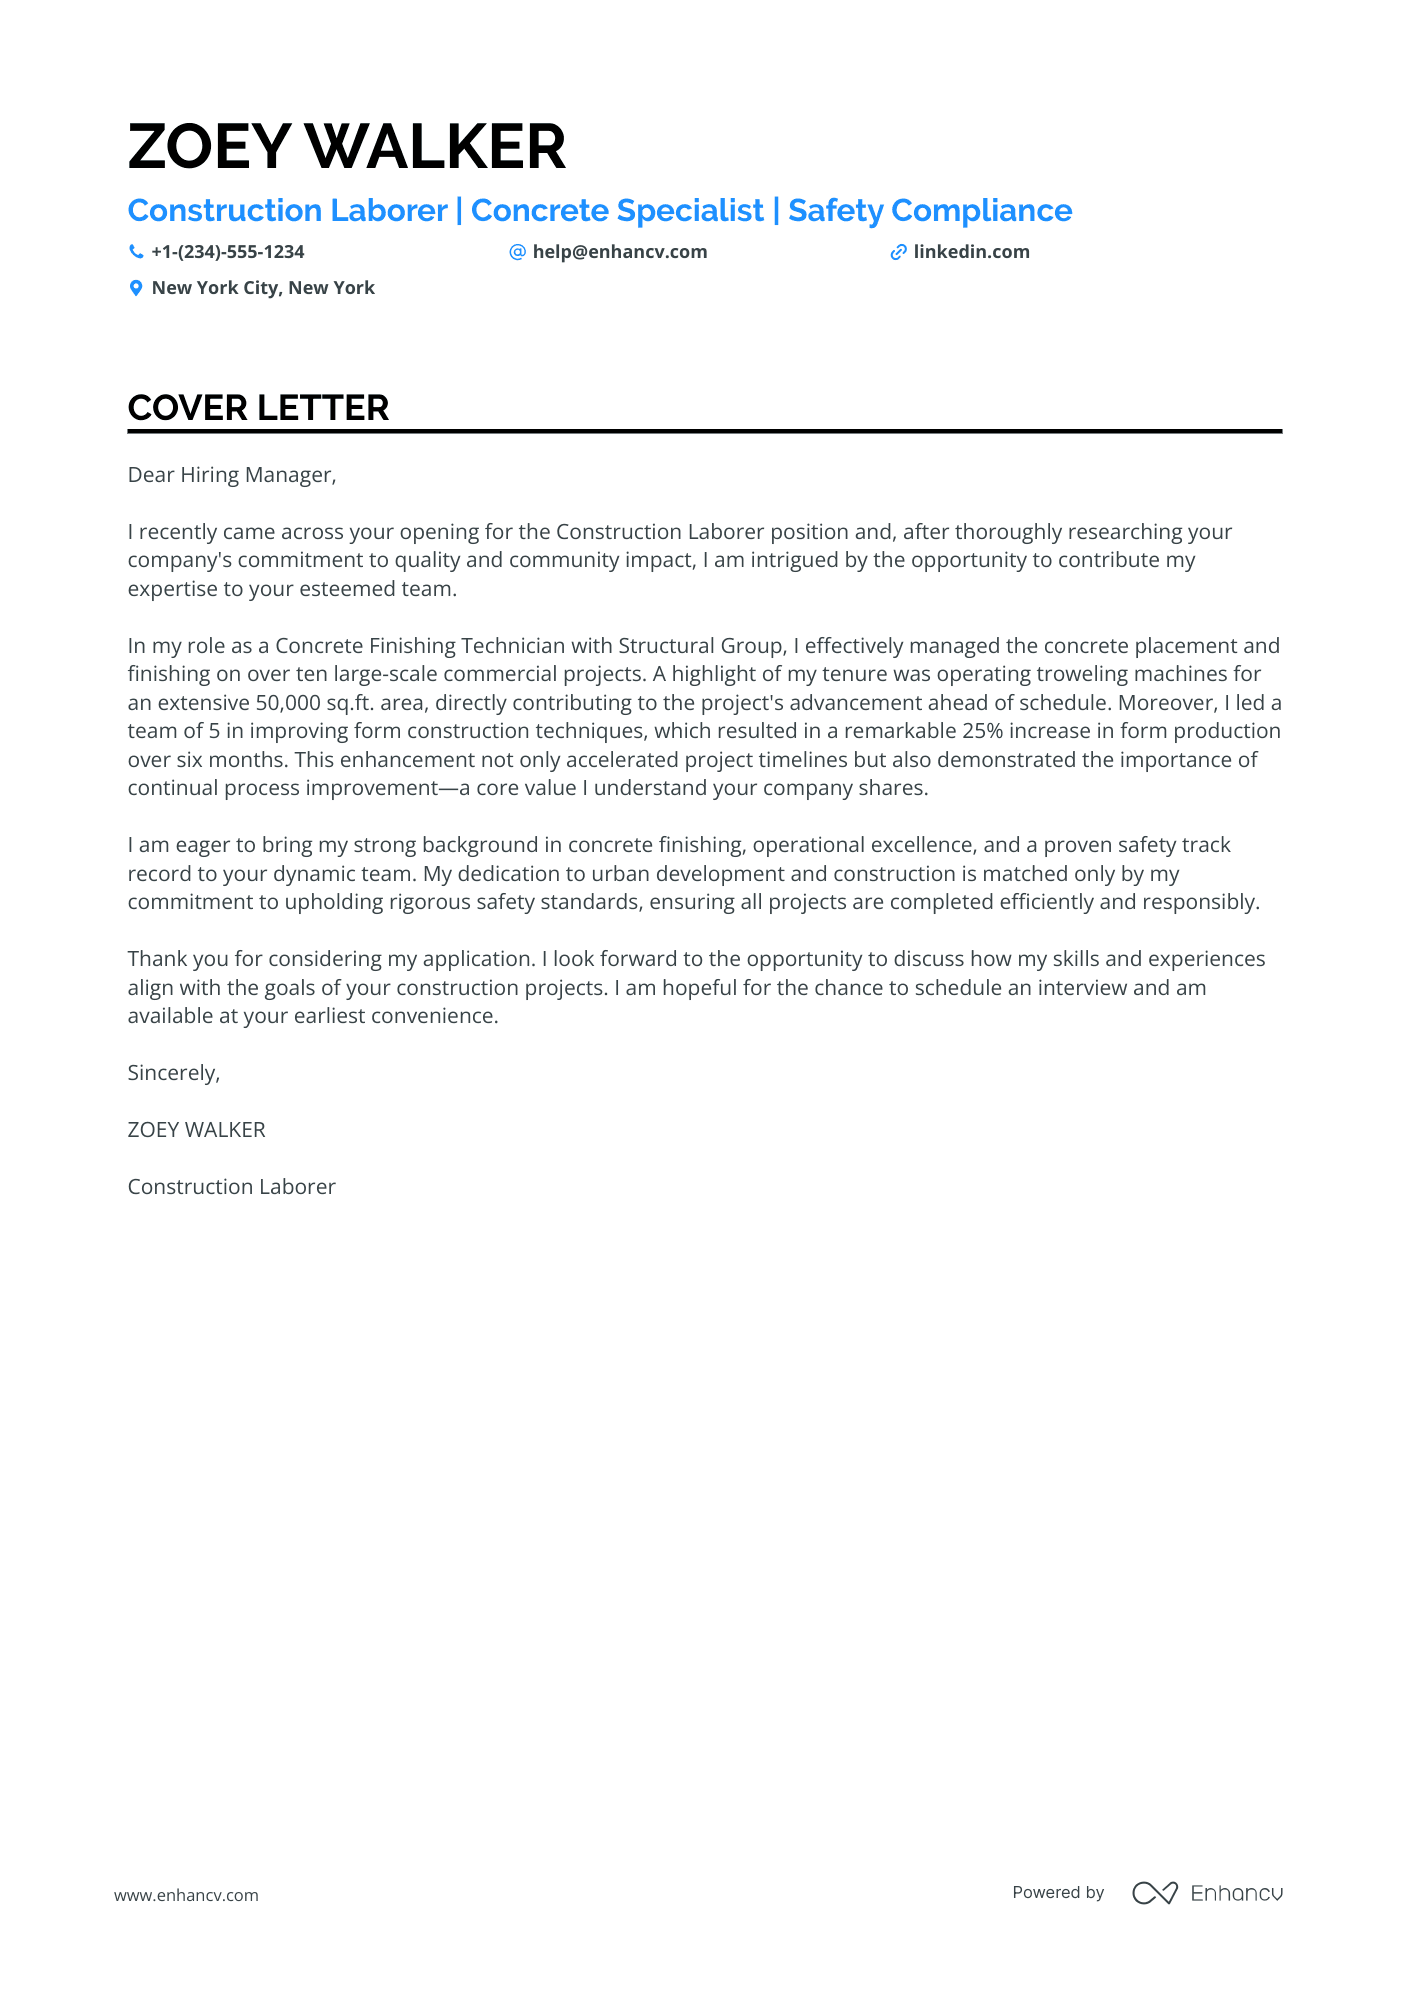 Construction Worker cover letter